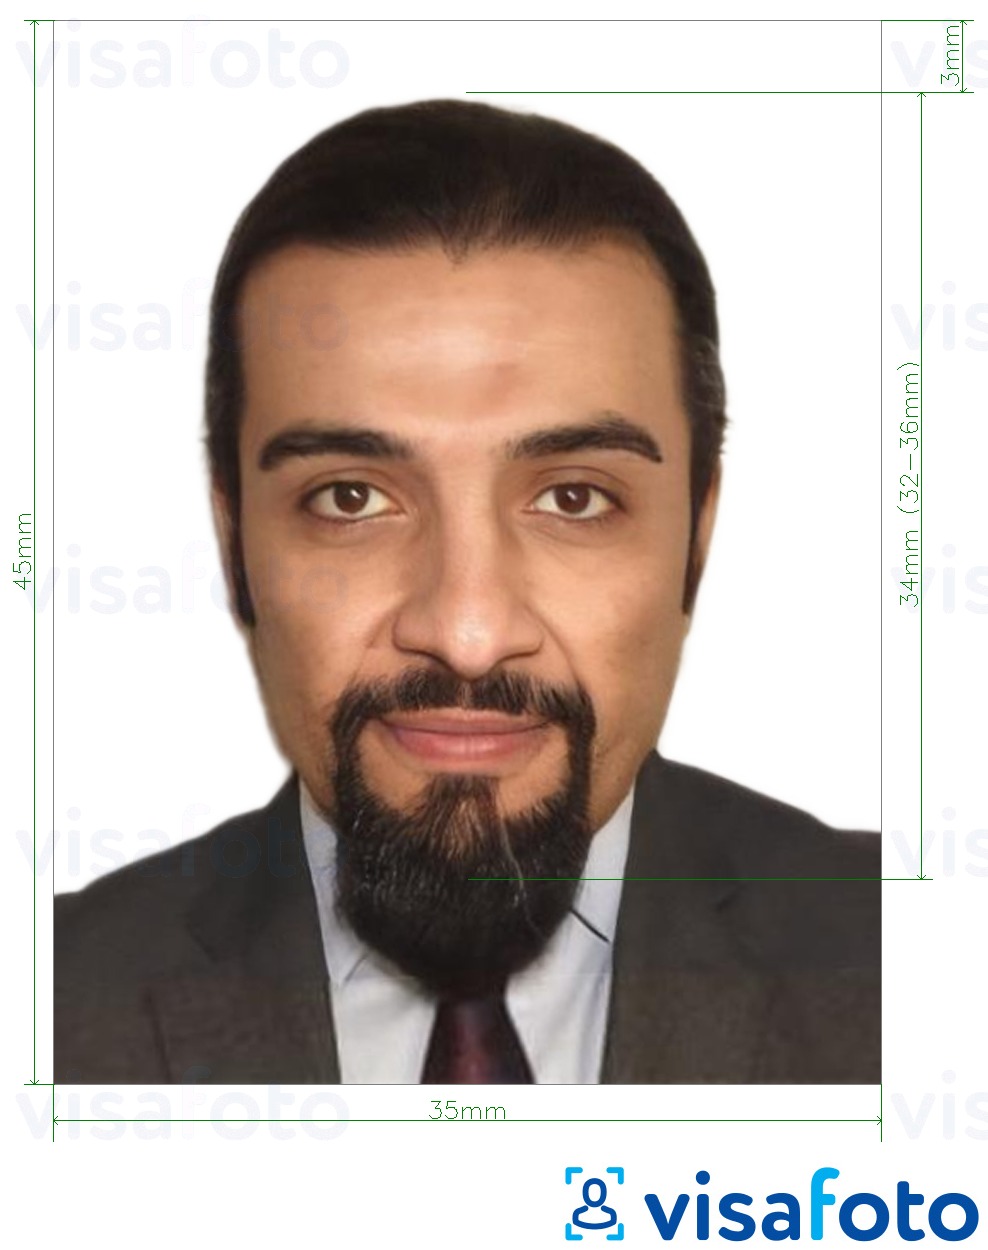 Example of photo for Lebanon ID card 3.5x4.5 cm (35x45 mm) with exact size specification